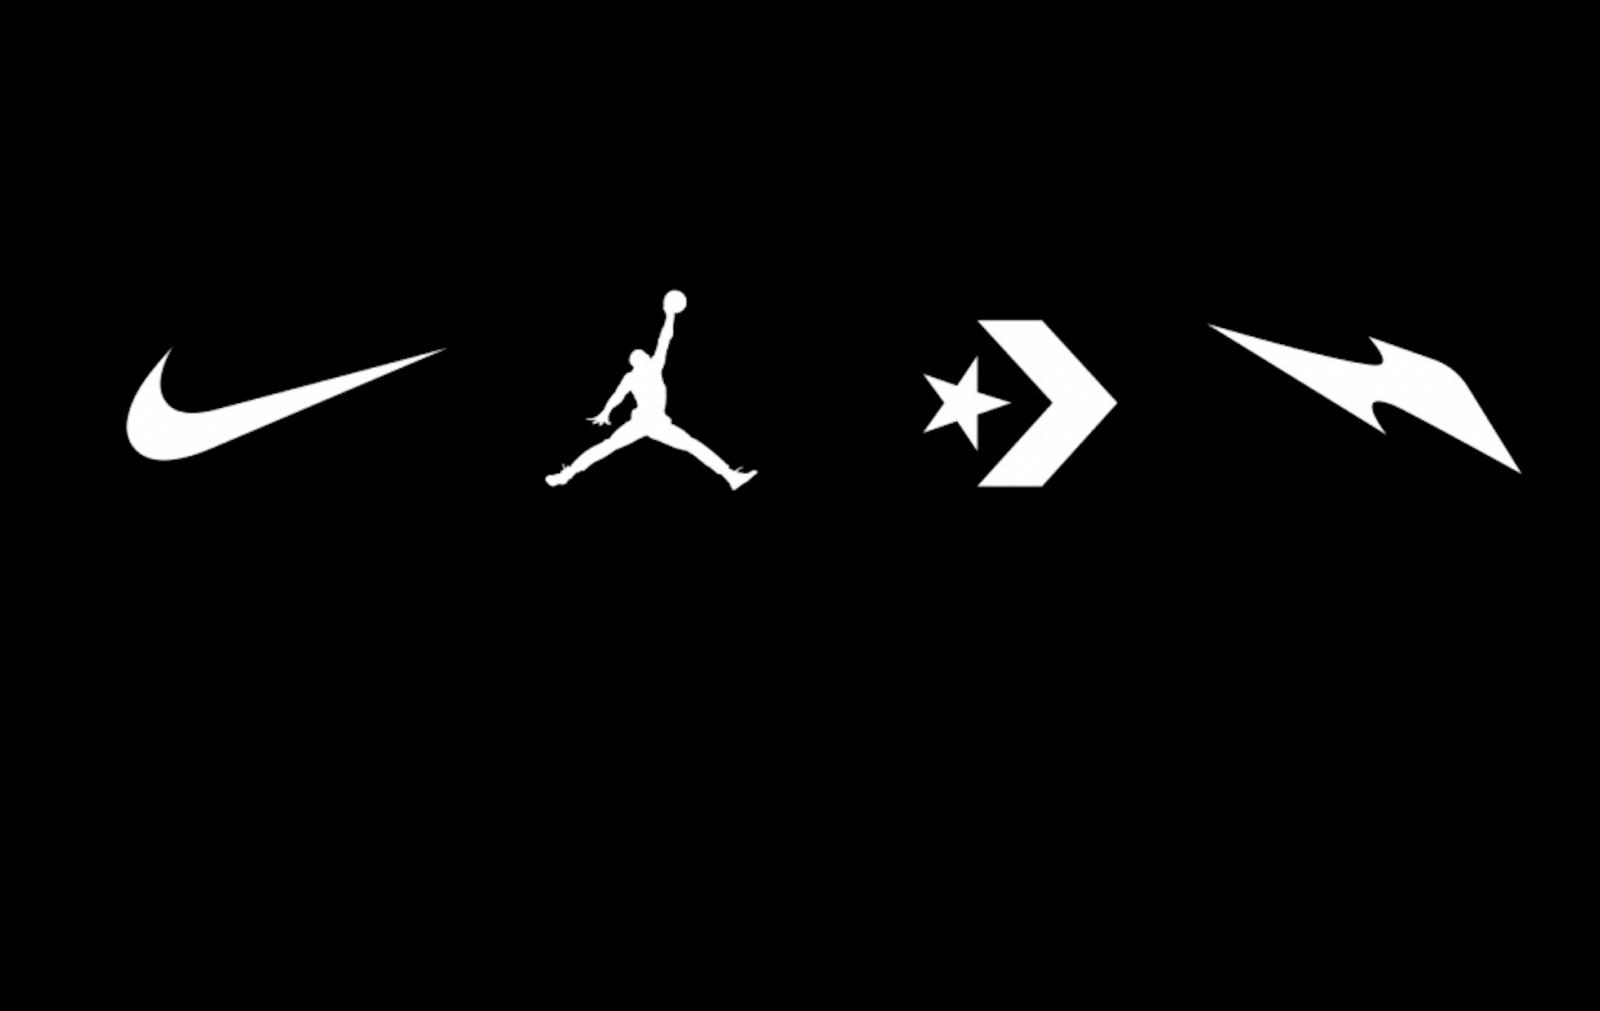 New Nike Trademark Filings Shed Light-weight on its Newest Moves in the Metaverse